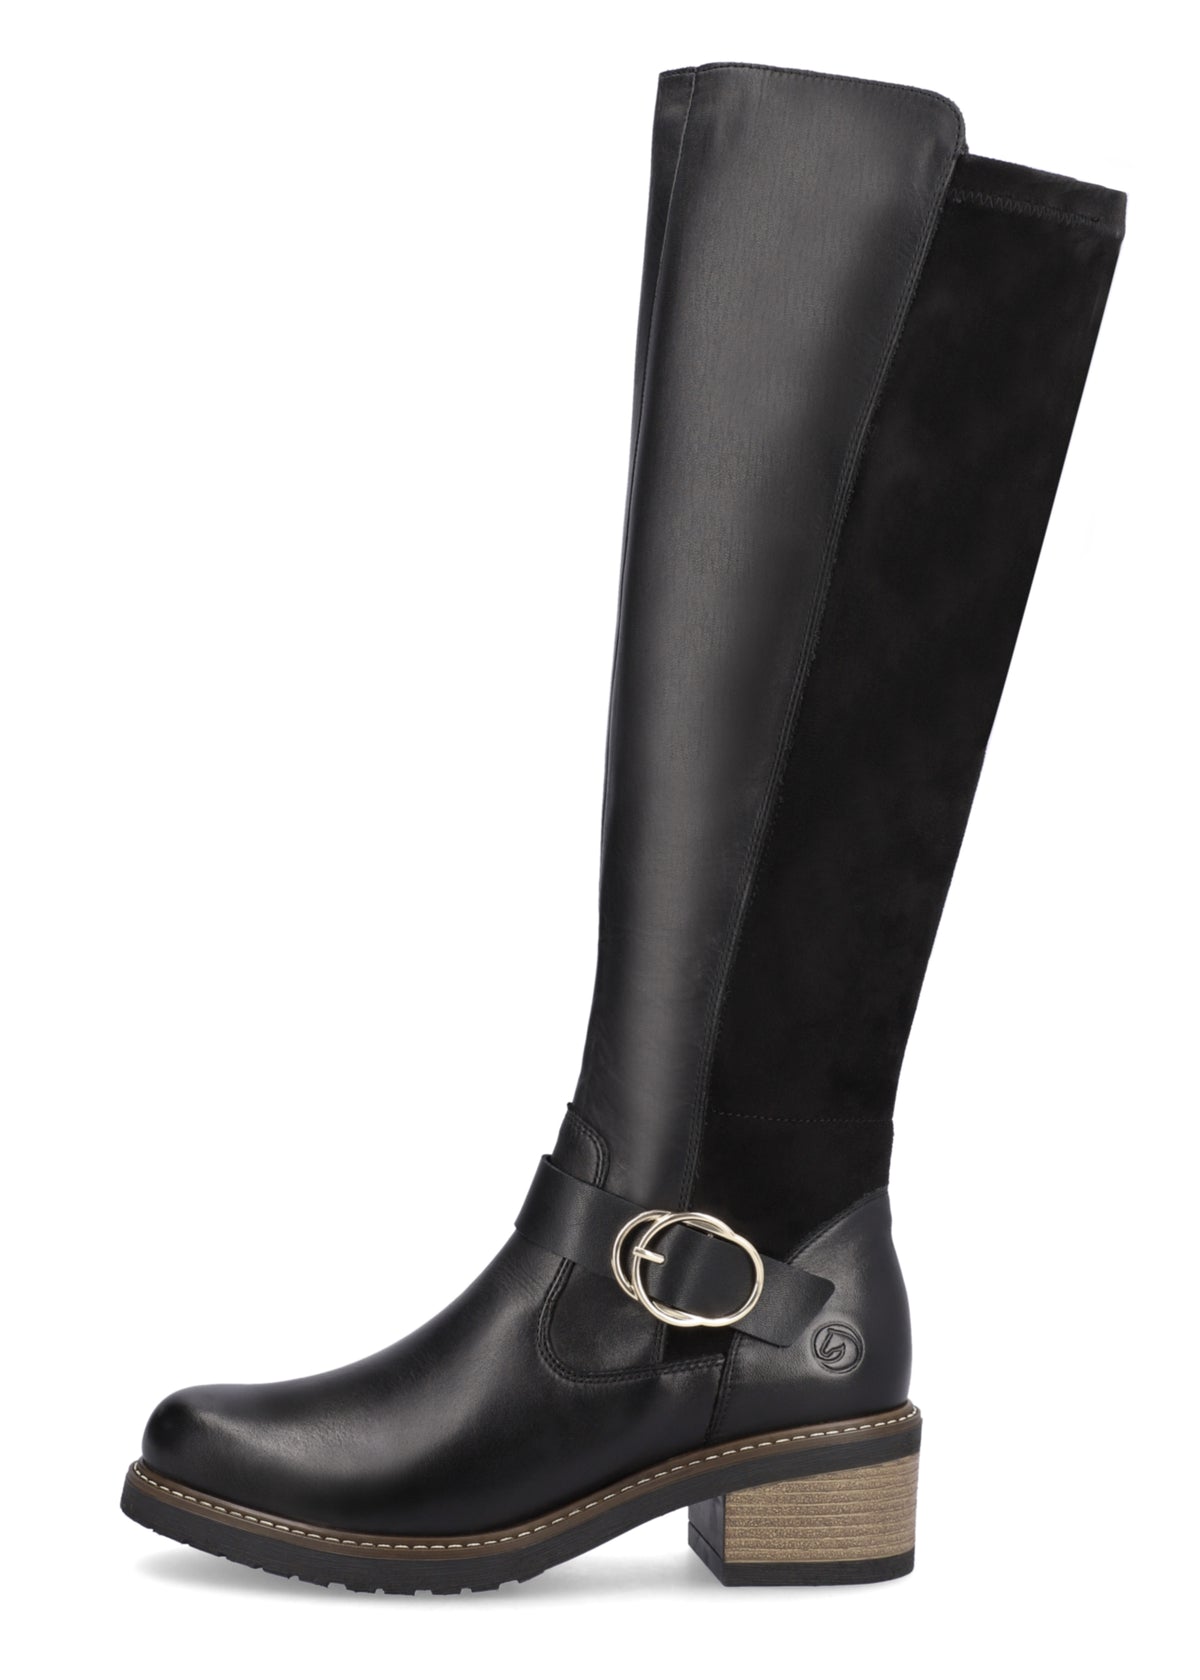 Boots with stiletto heel - black, flexible back, ML shaft